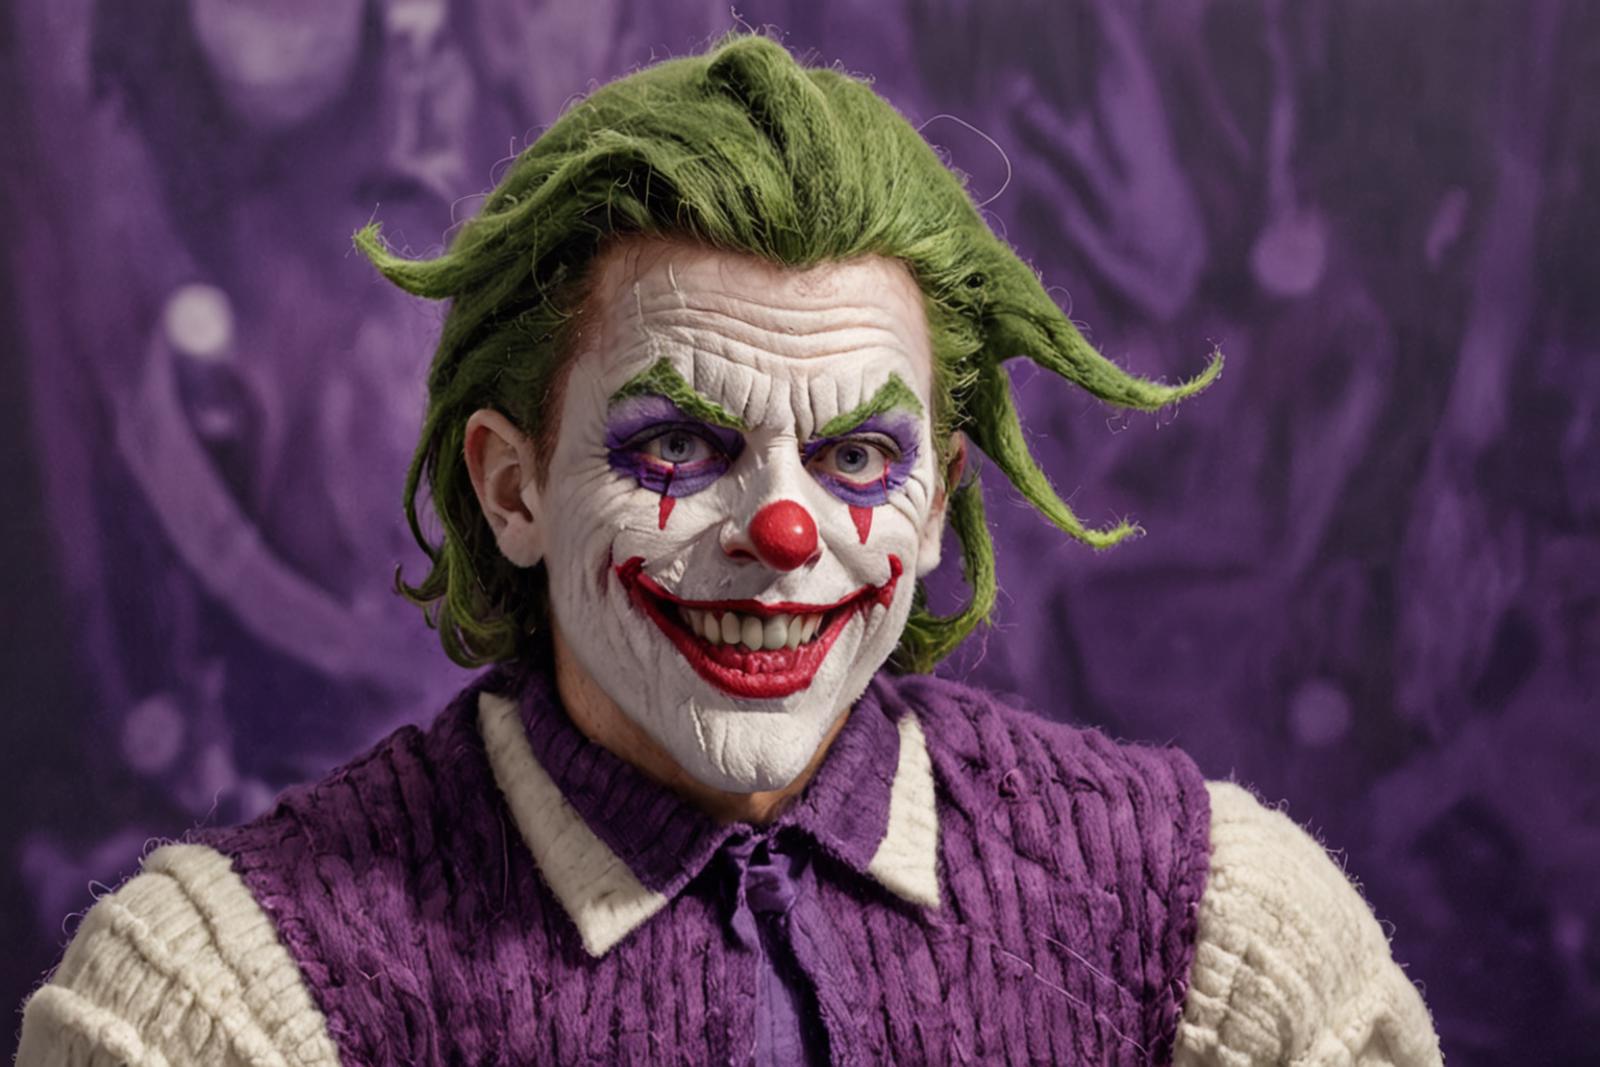 The Joker, a makeup-covered man, wearing purple and green, is smiling.